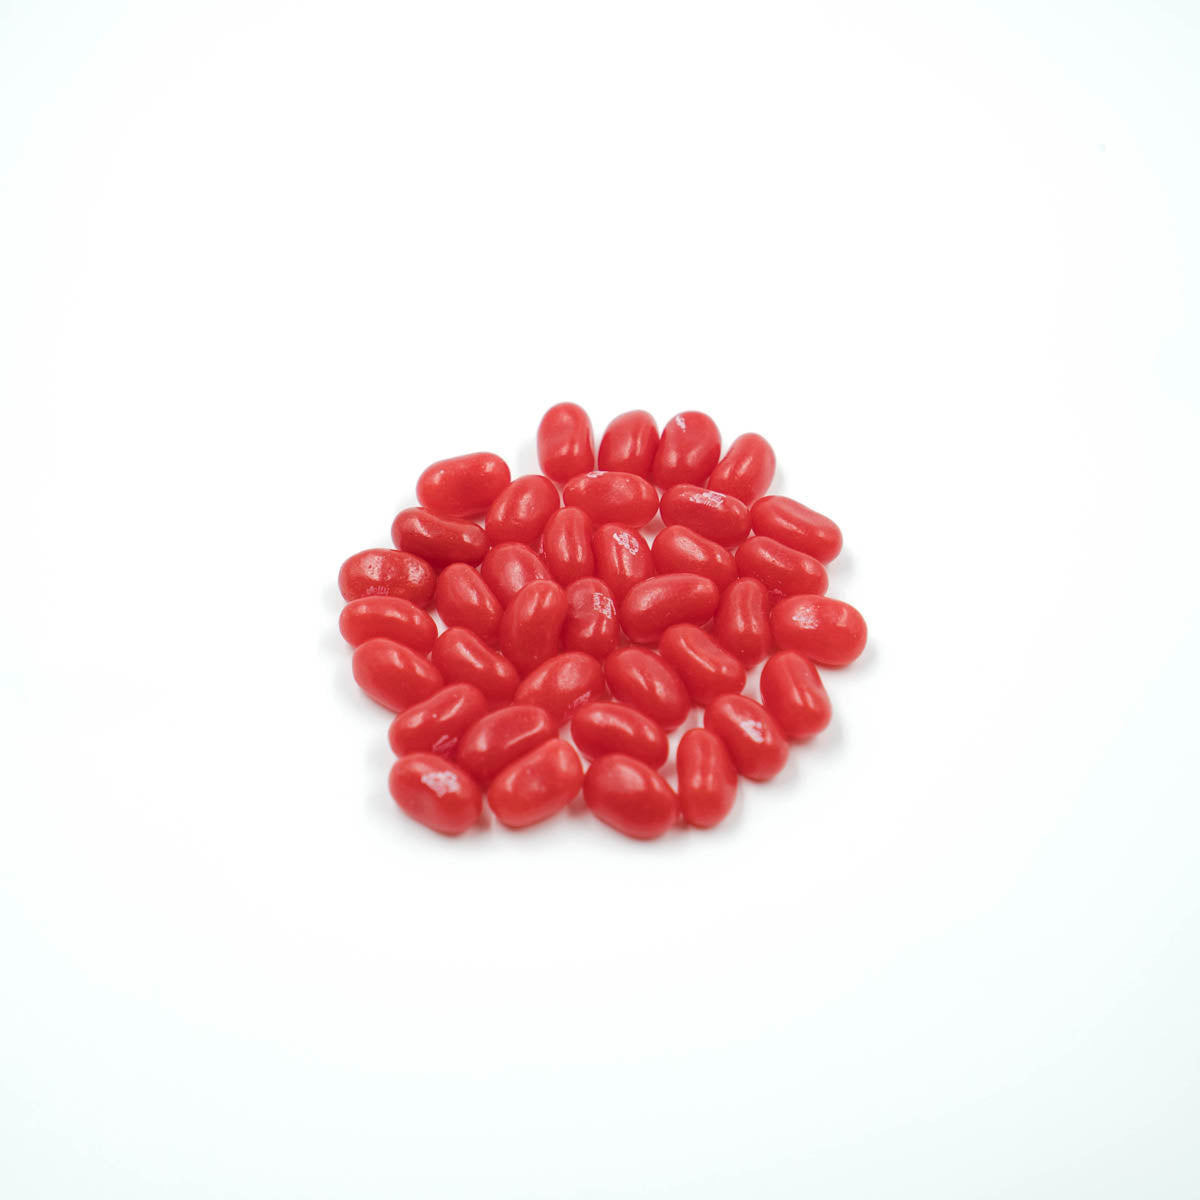 JELLY BELLY BEANS CANNELLE - My American Shop